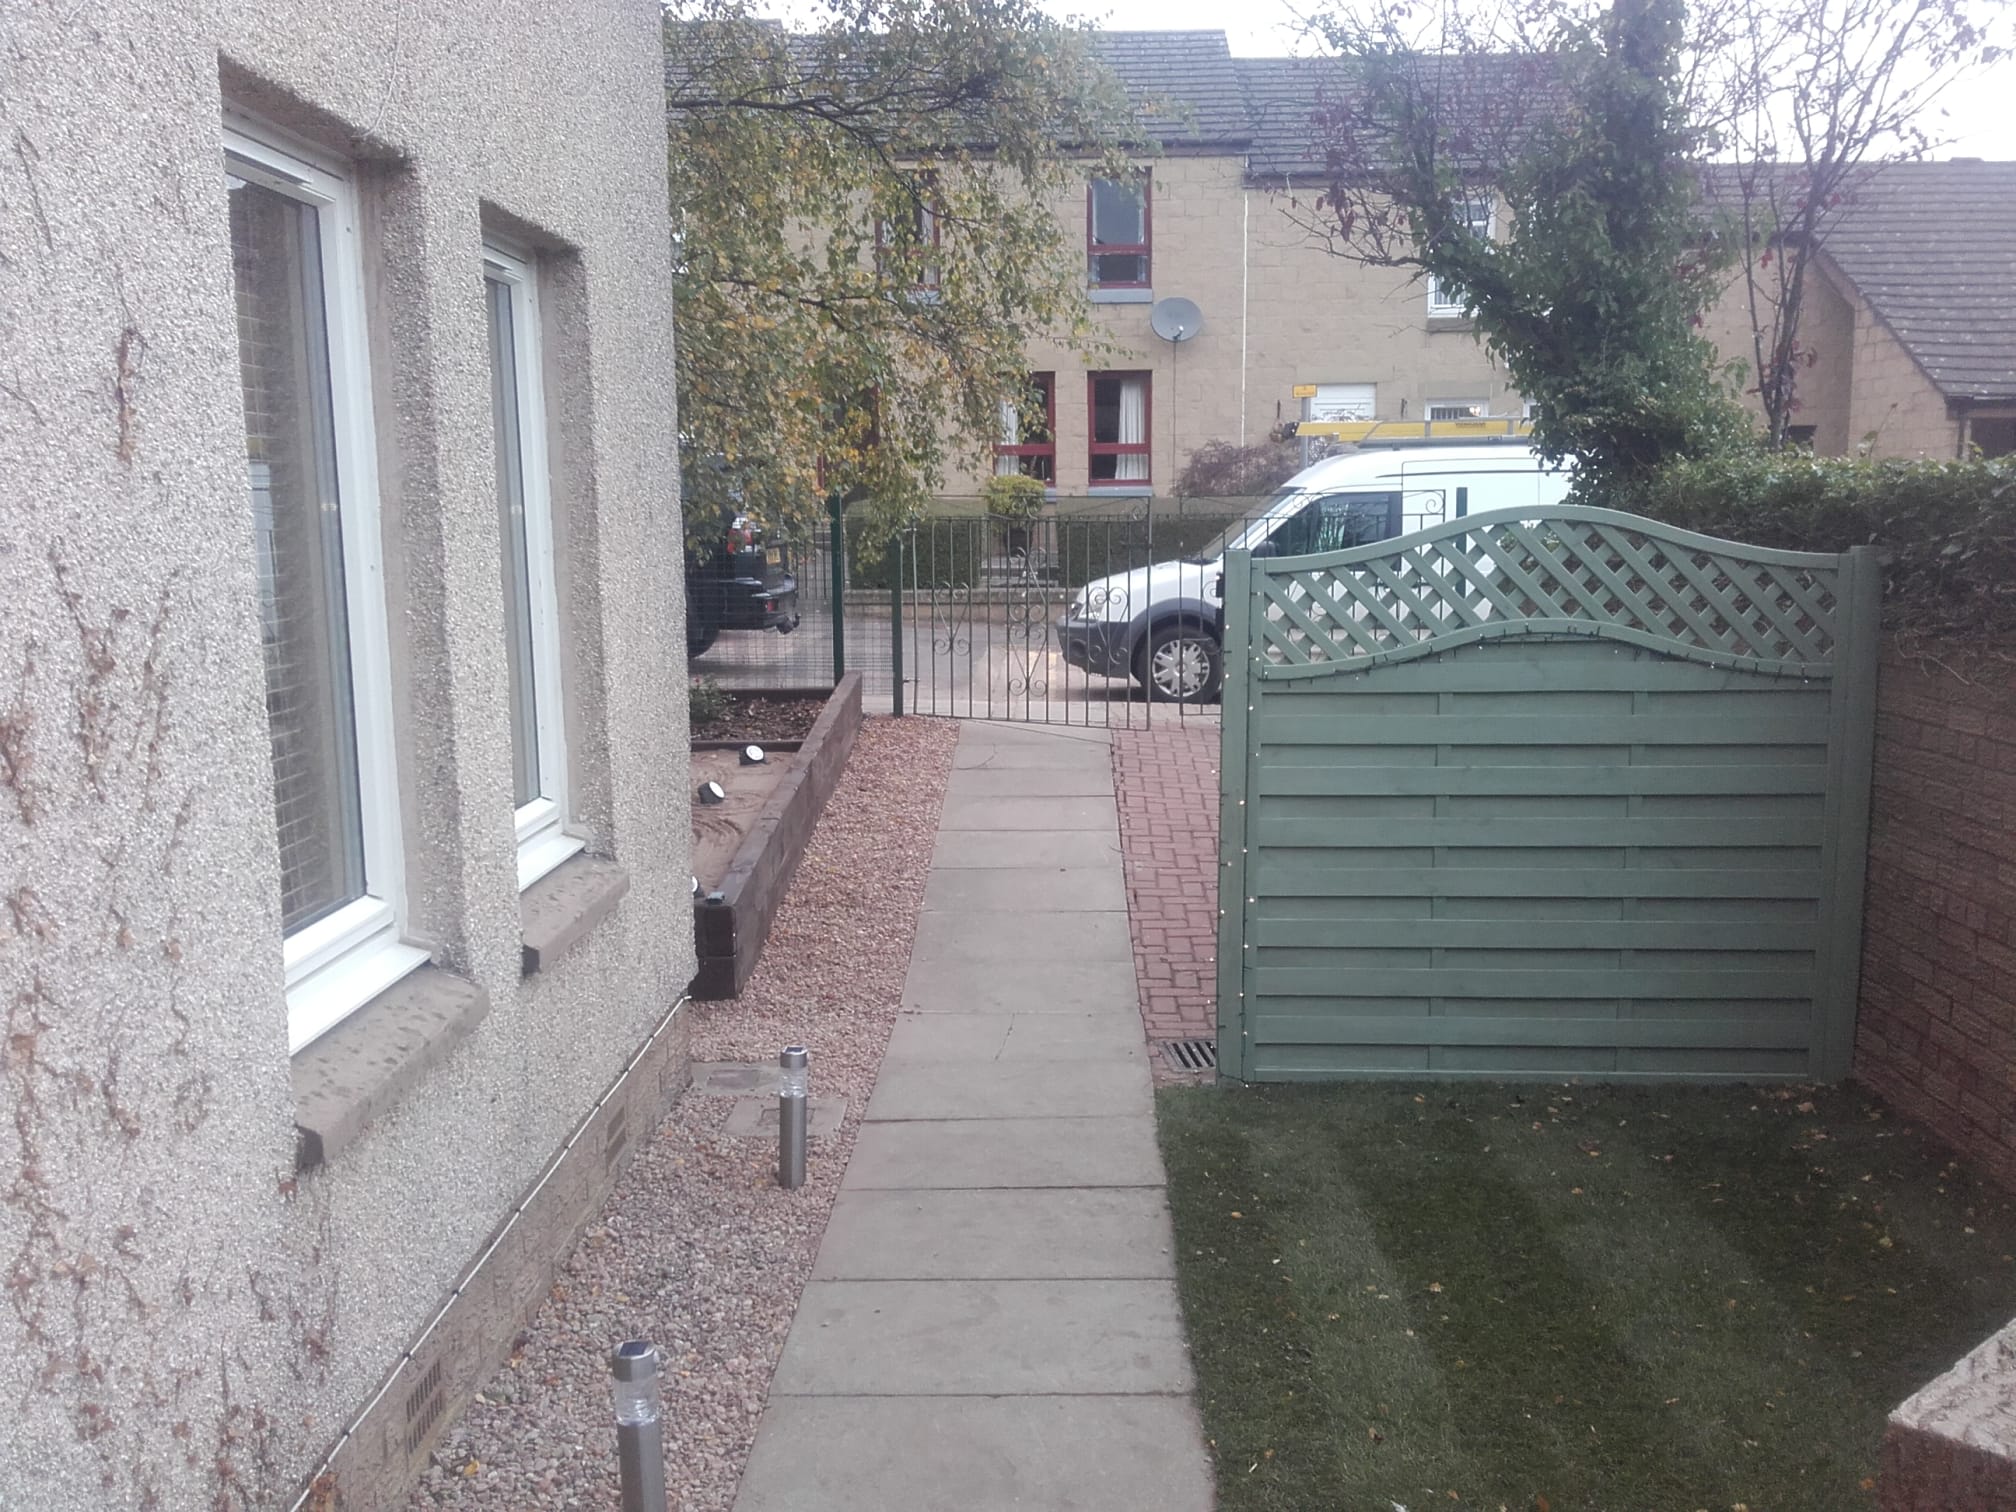 Images Tayside Lawn Care Solutions